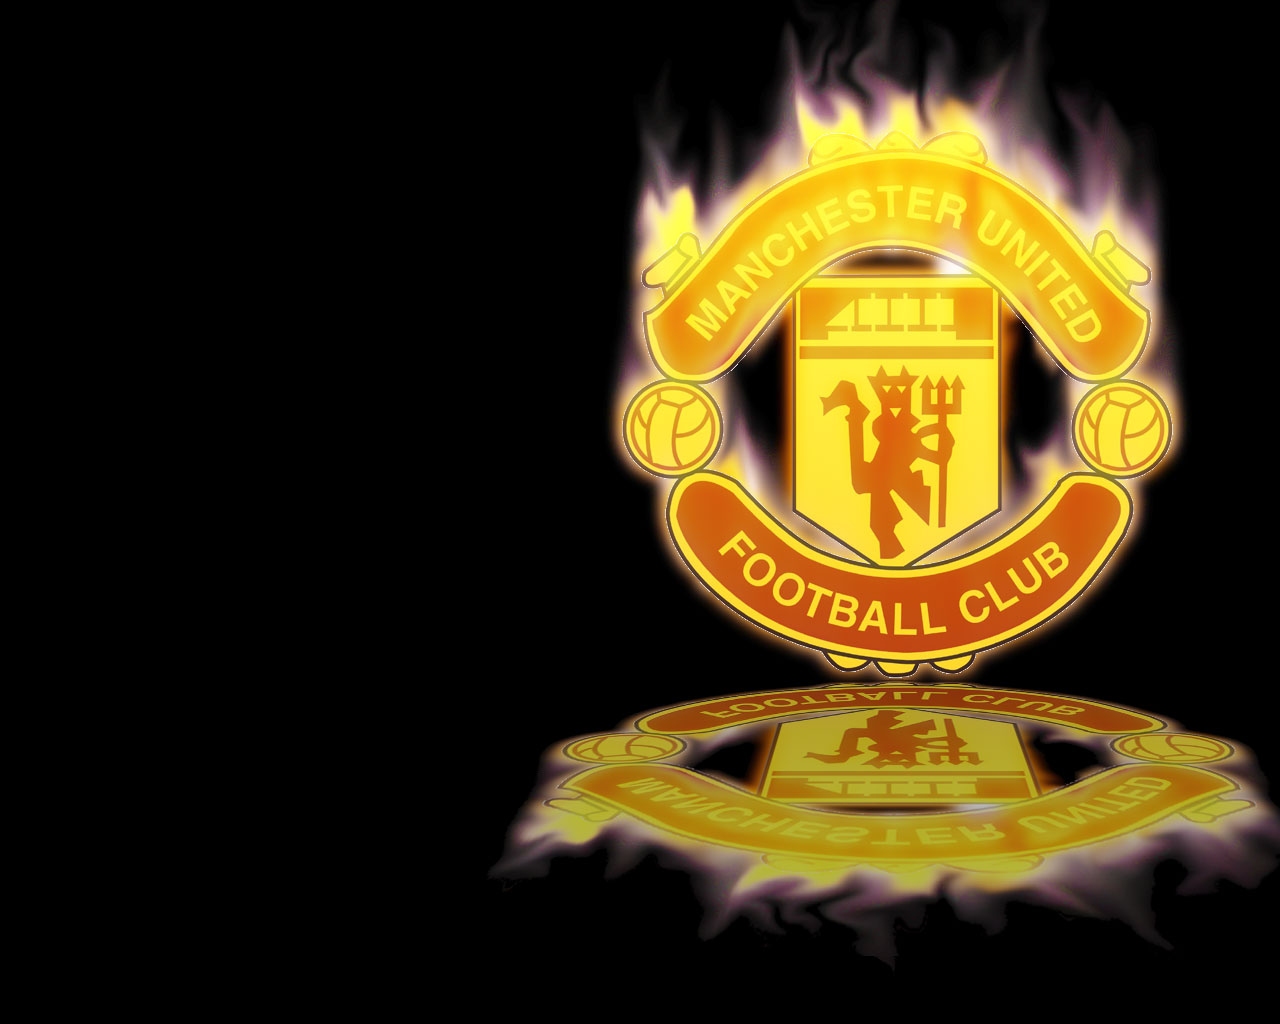 Manchester United Wallpapers HD HD Wallpapers Backgrounds Photos